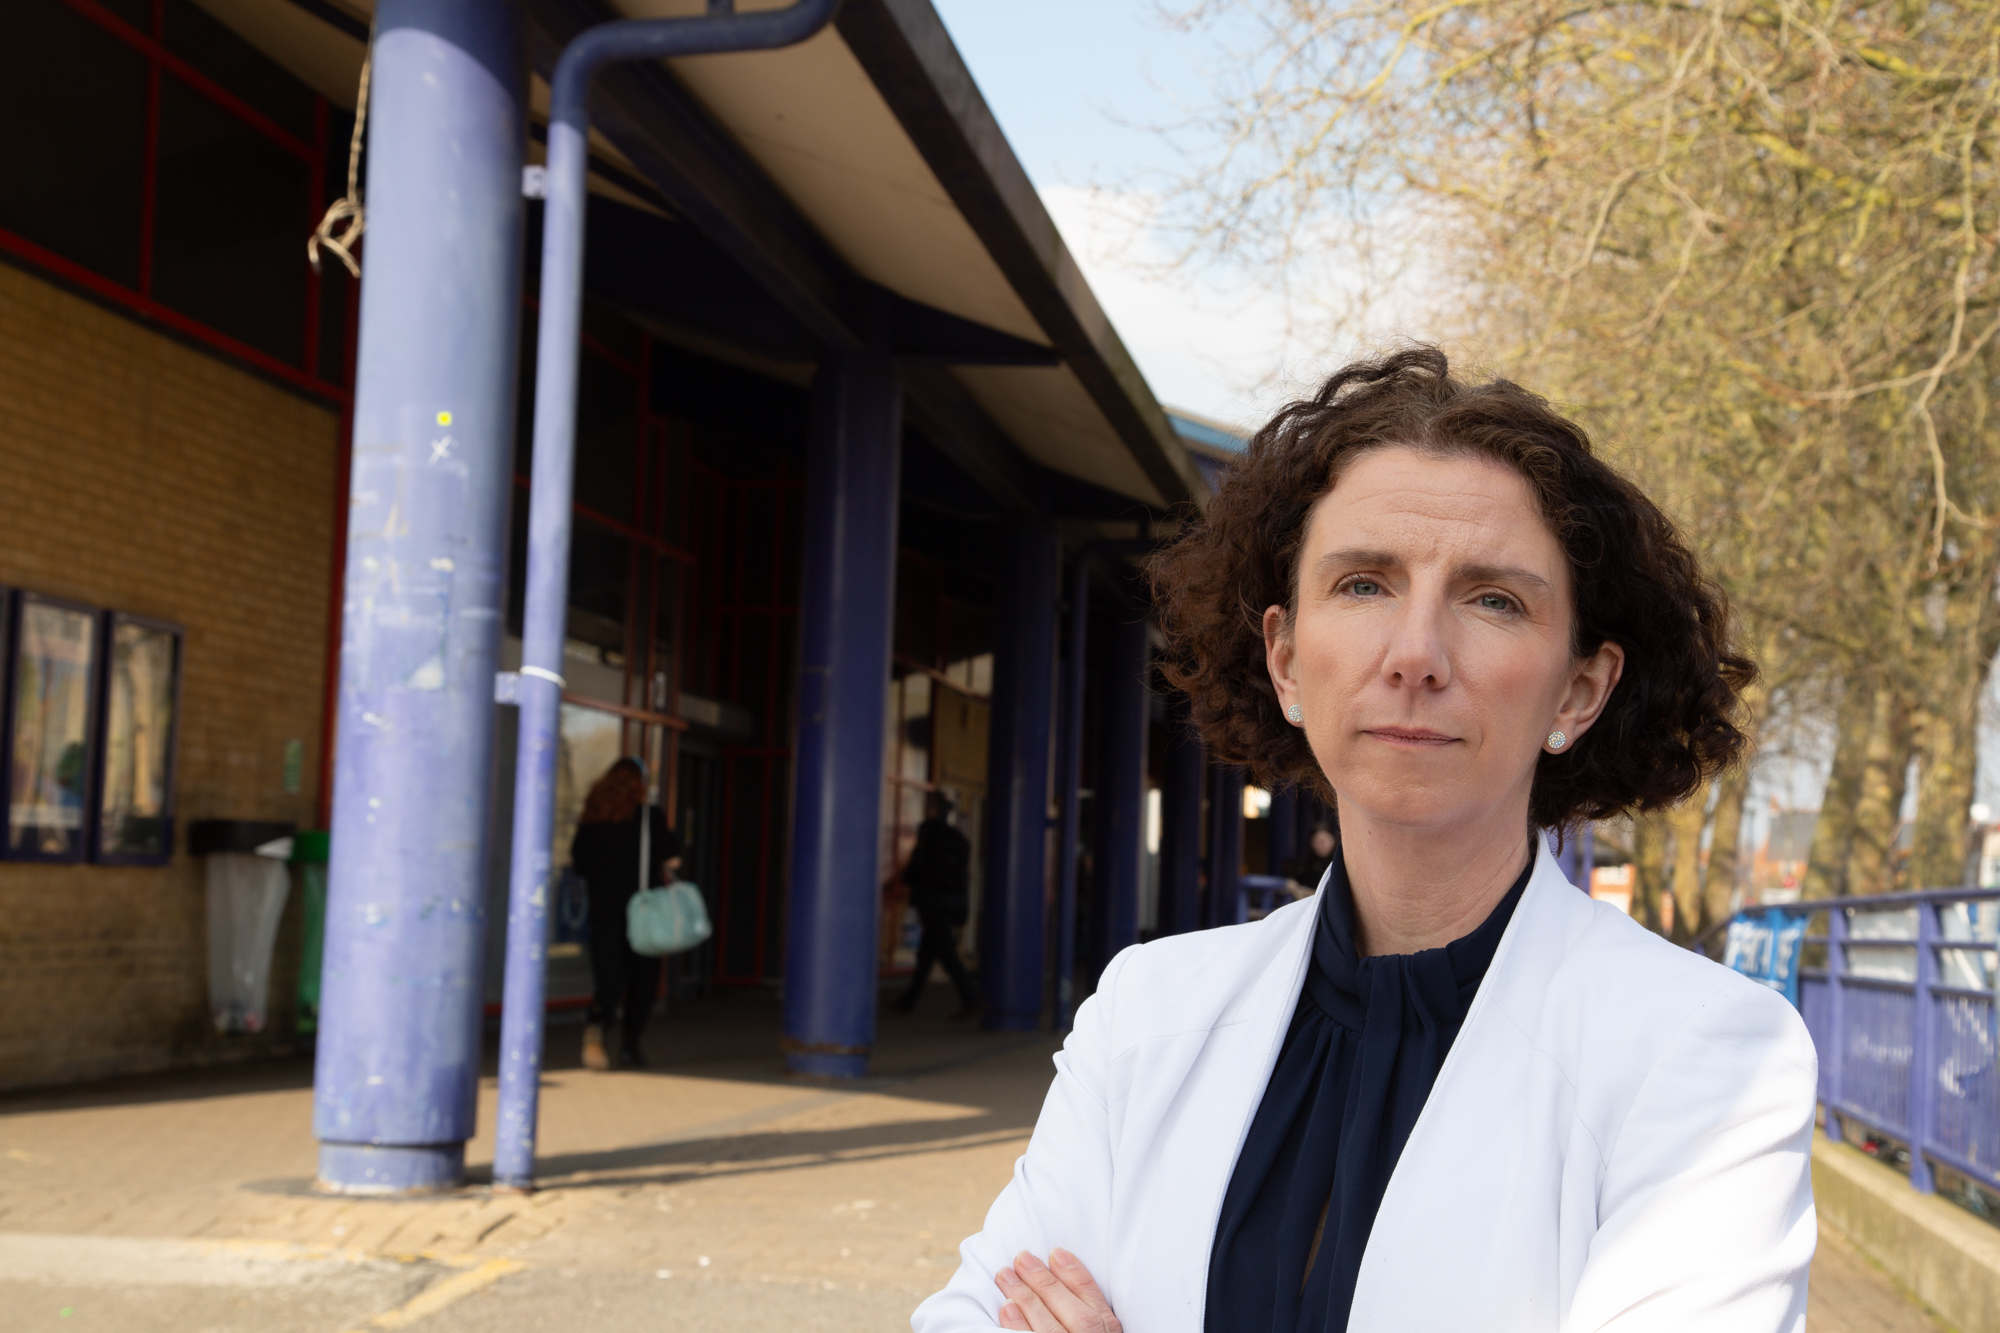 Anneliese Dodds, Labour MP for Oxford East